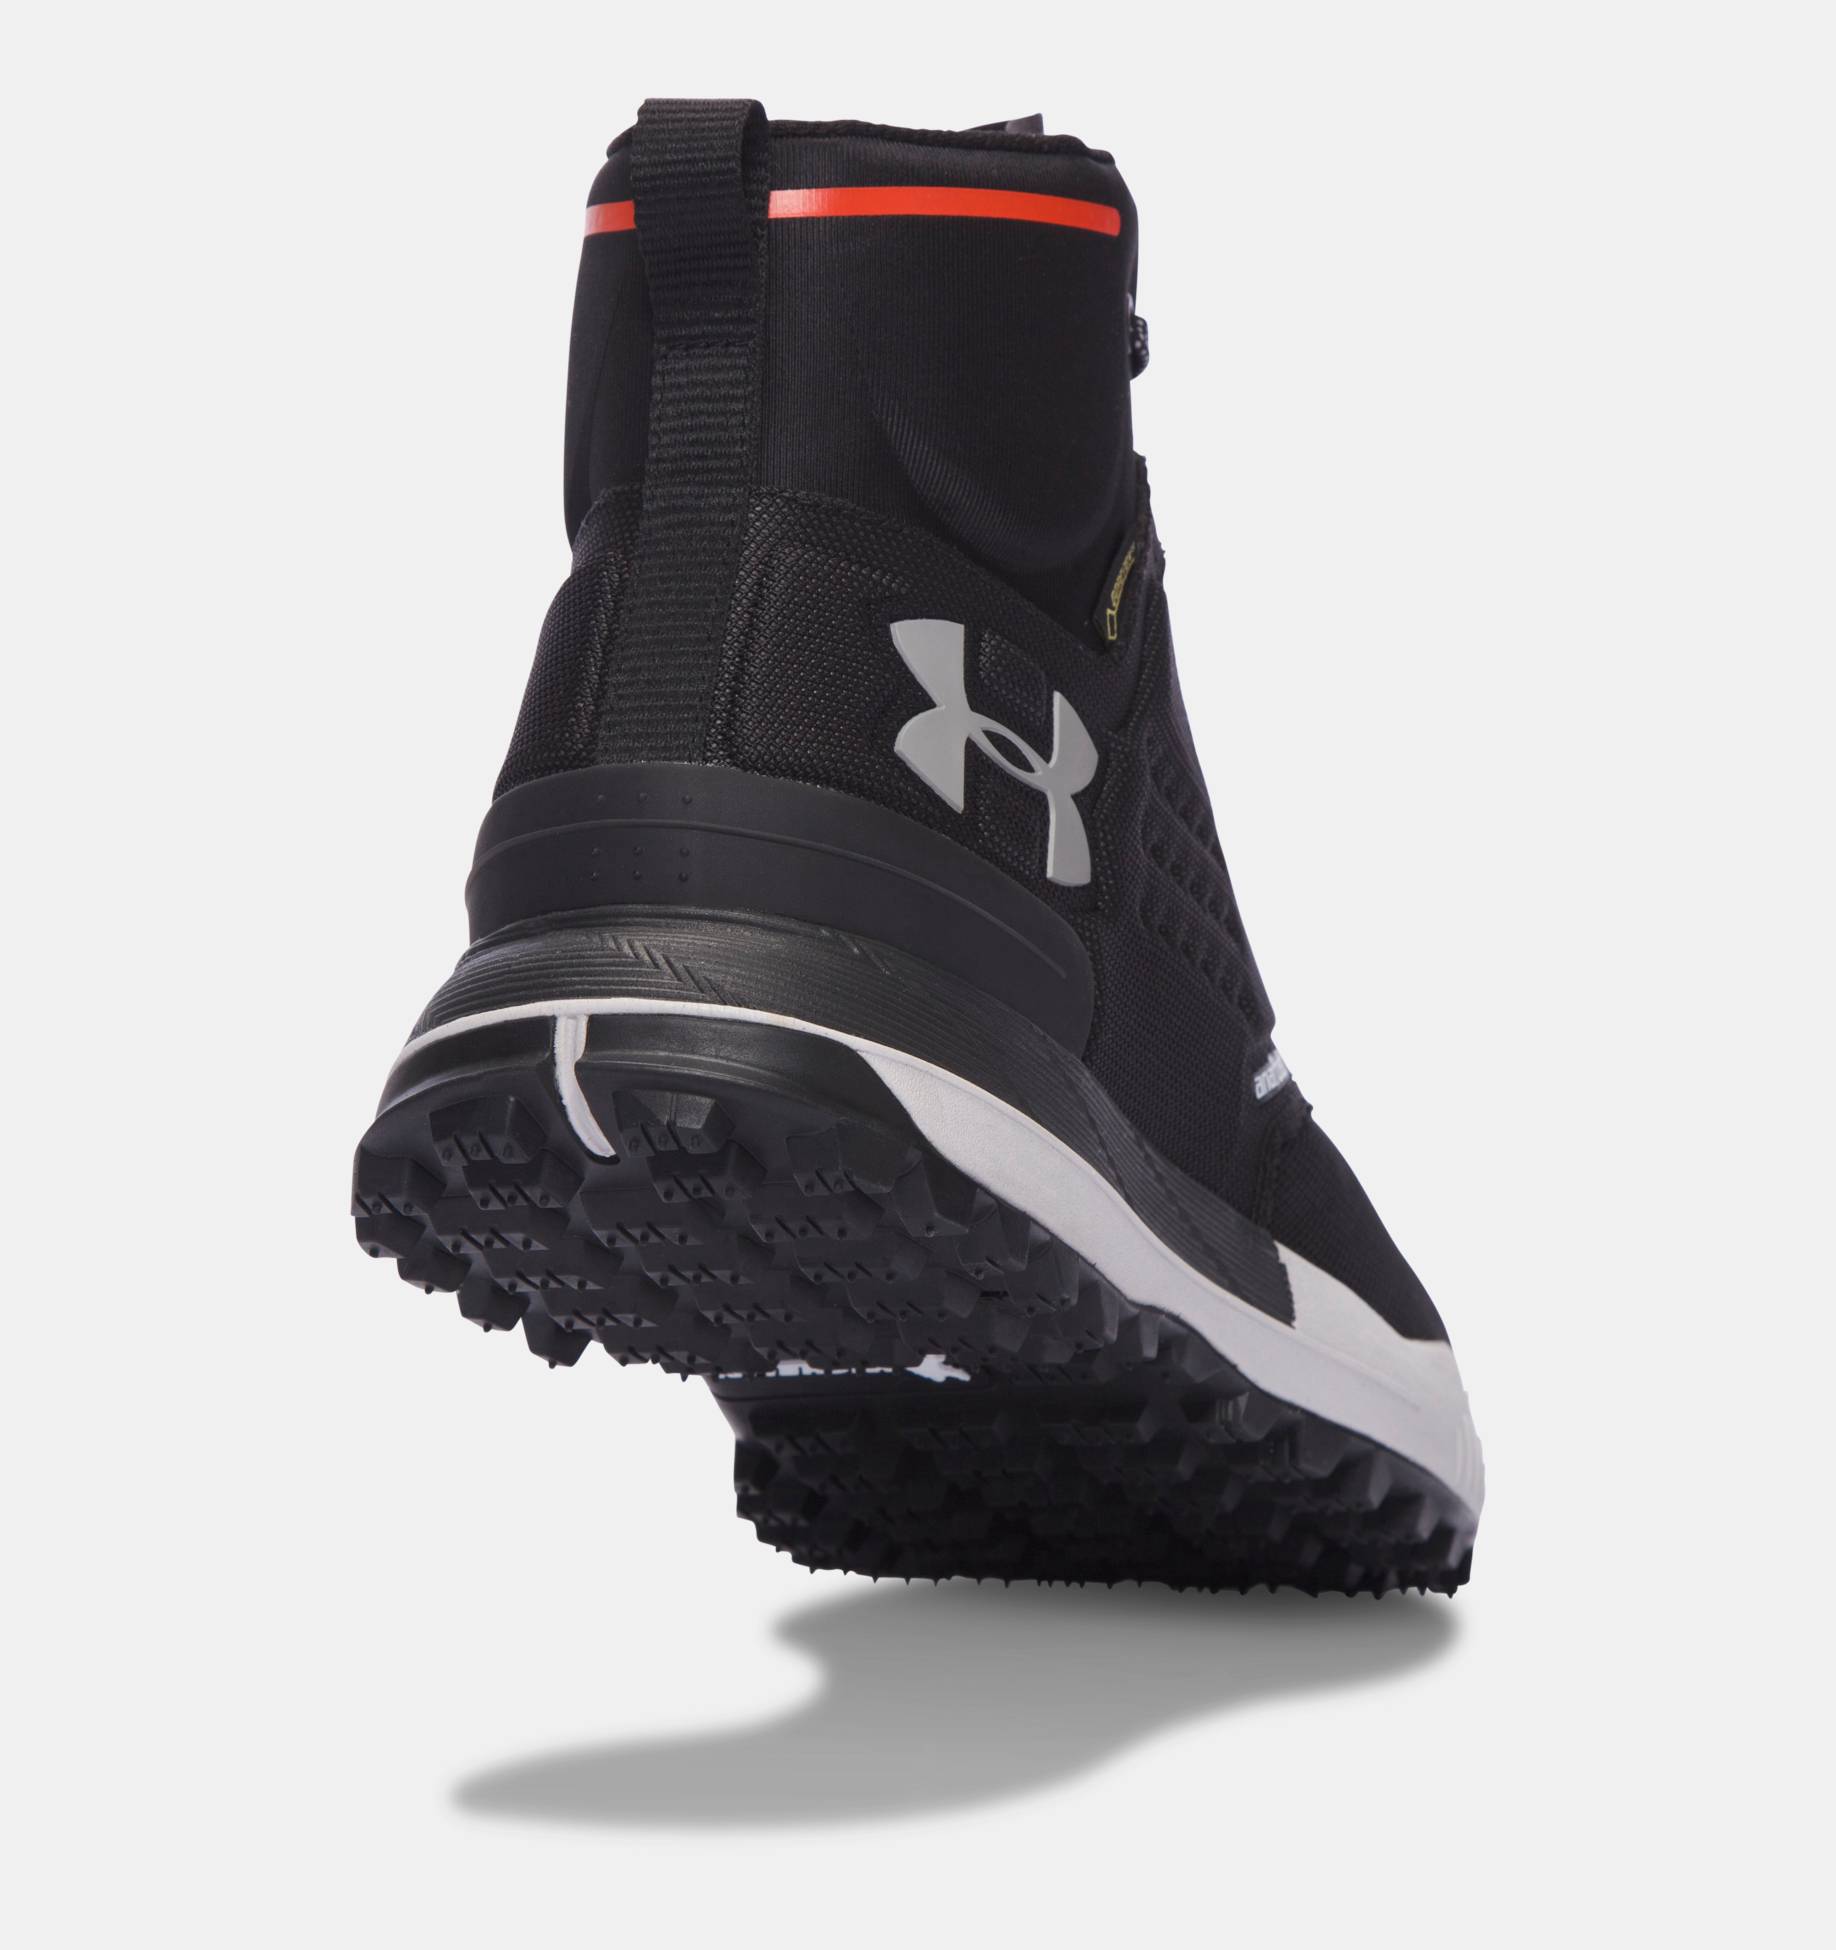 Outdoor Shoes -  under armour Newell Ridge Mid Gore-Tex 7340